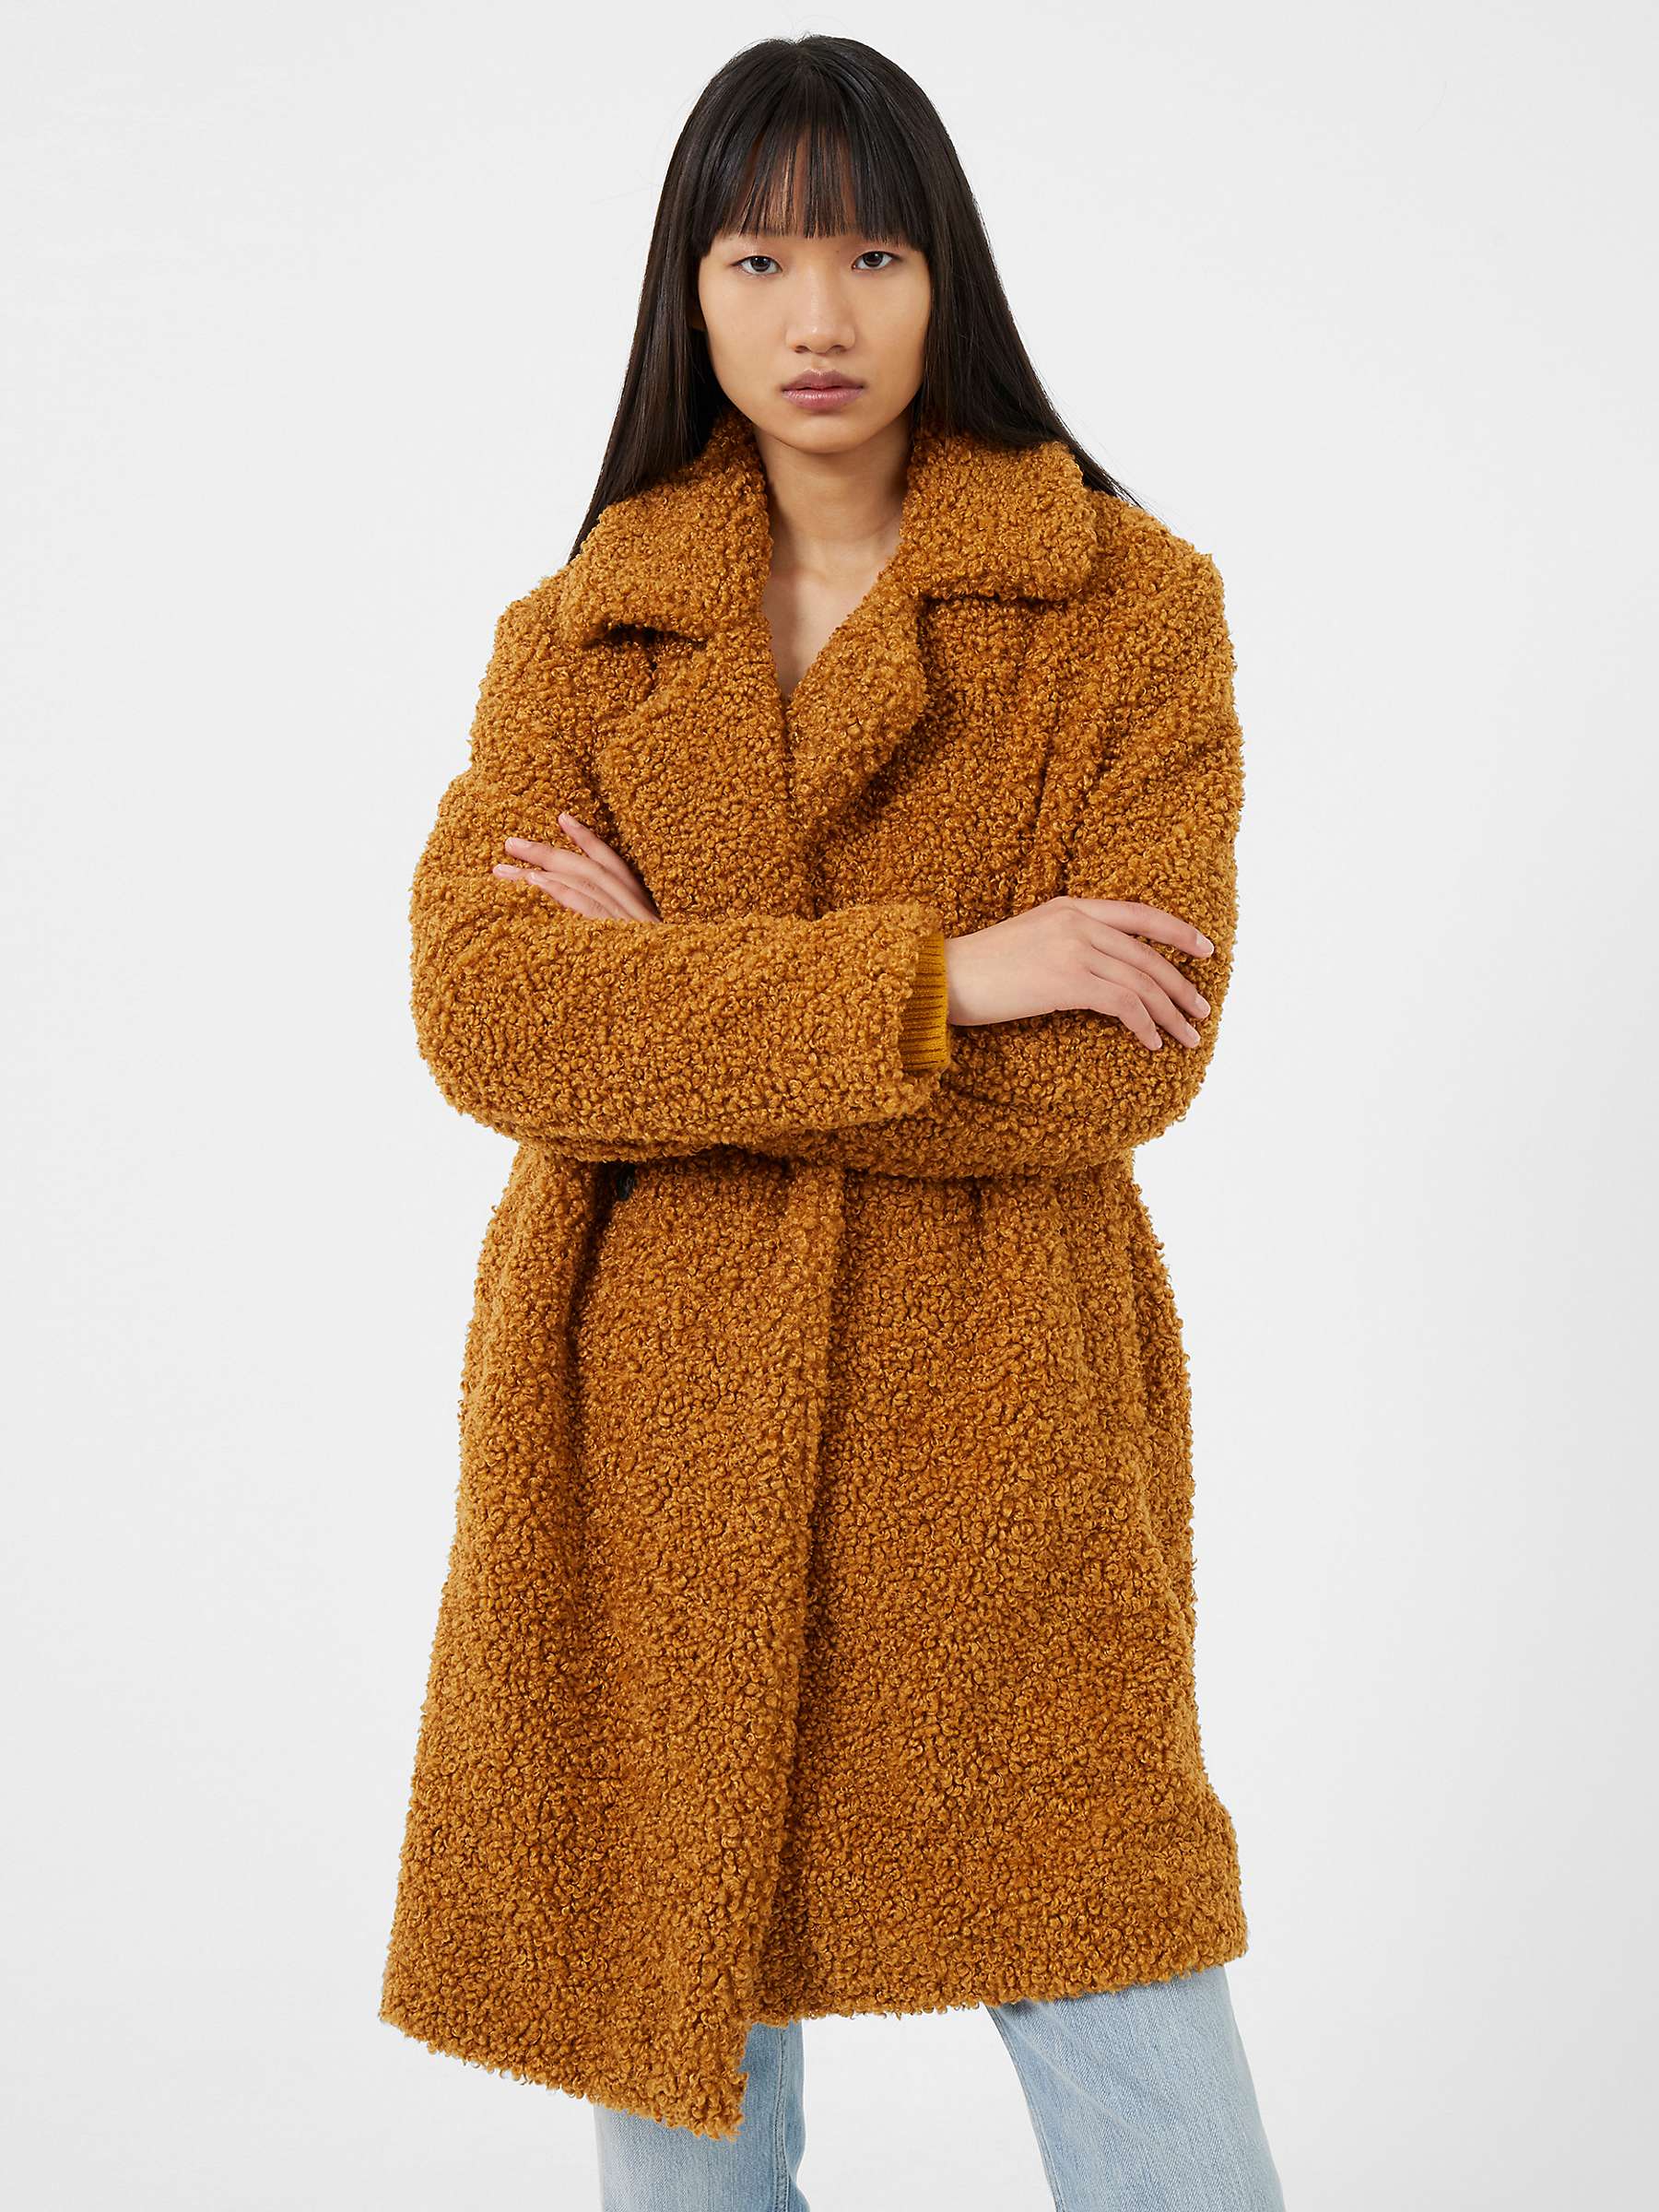 Buy French Connection Callie Iren Borg Double Breasted Coat Online at johnlewis.com